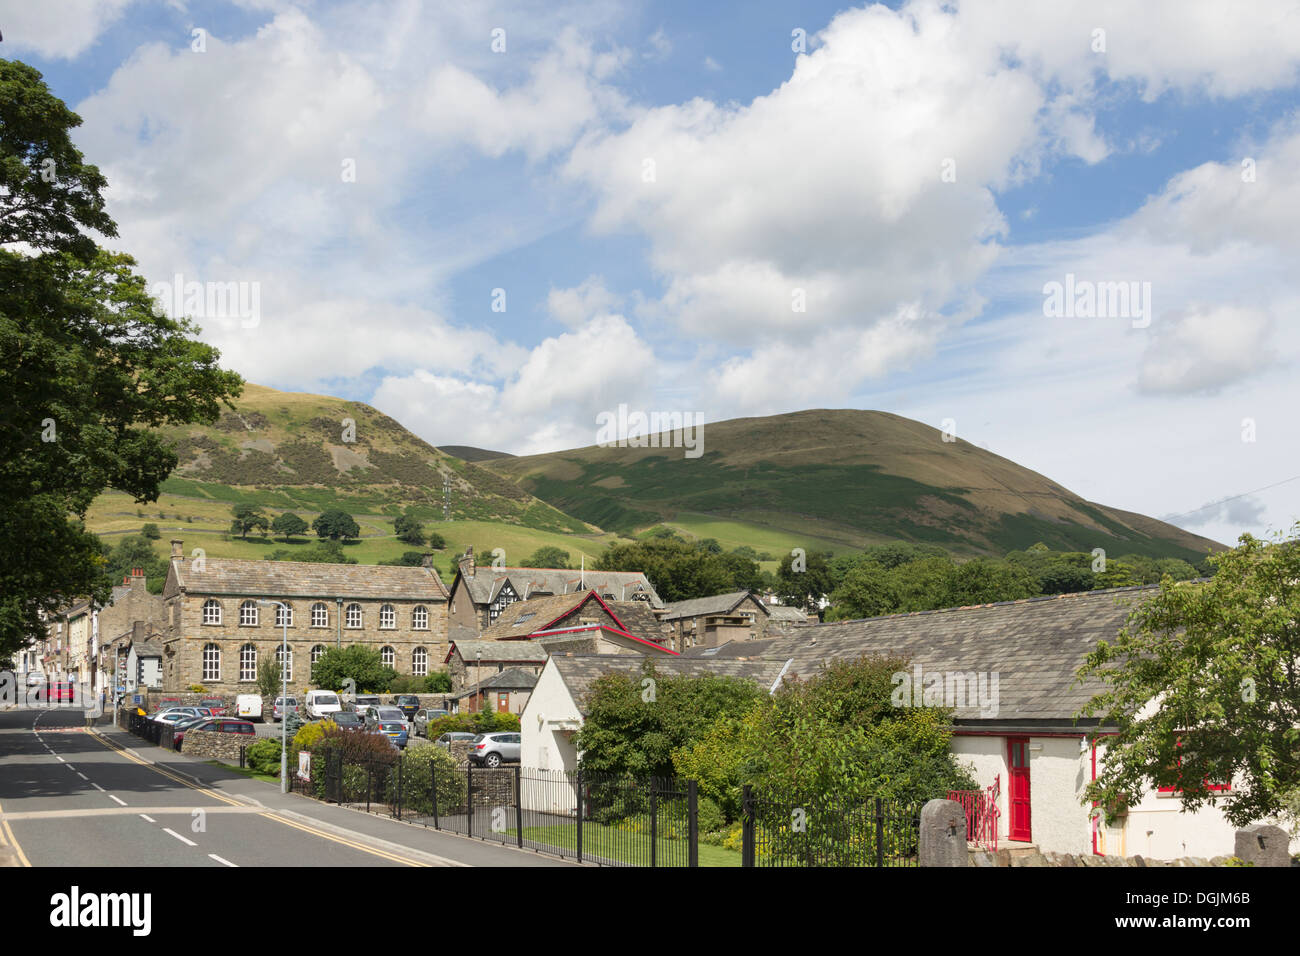 Loftus Hill, Sedbergh in Cumbria, looking north over the centre of Sedbergh. Beyond the town is Winder hill and Crook Hill. Stock Photo